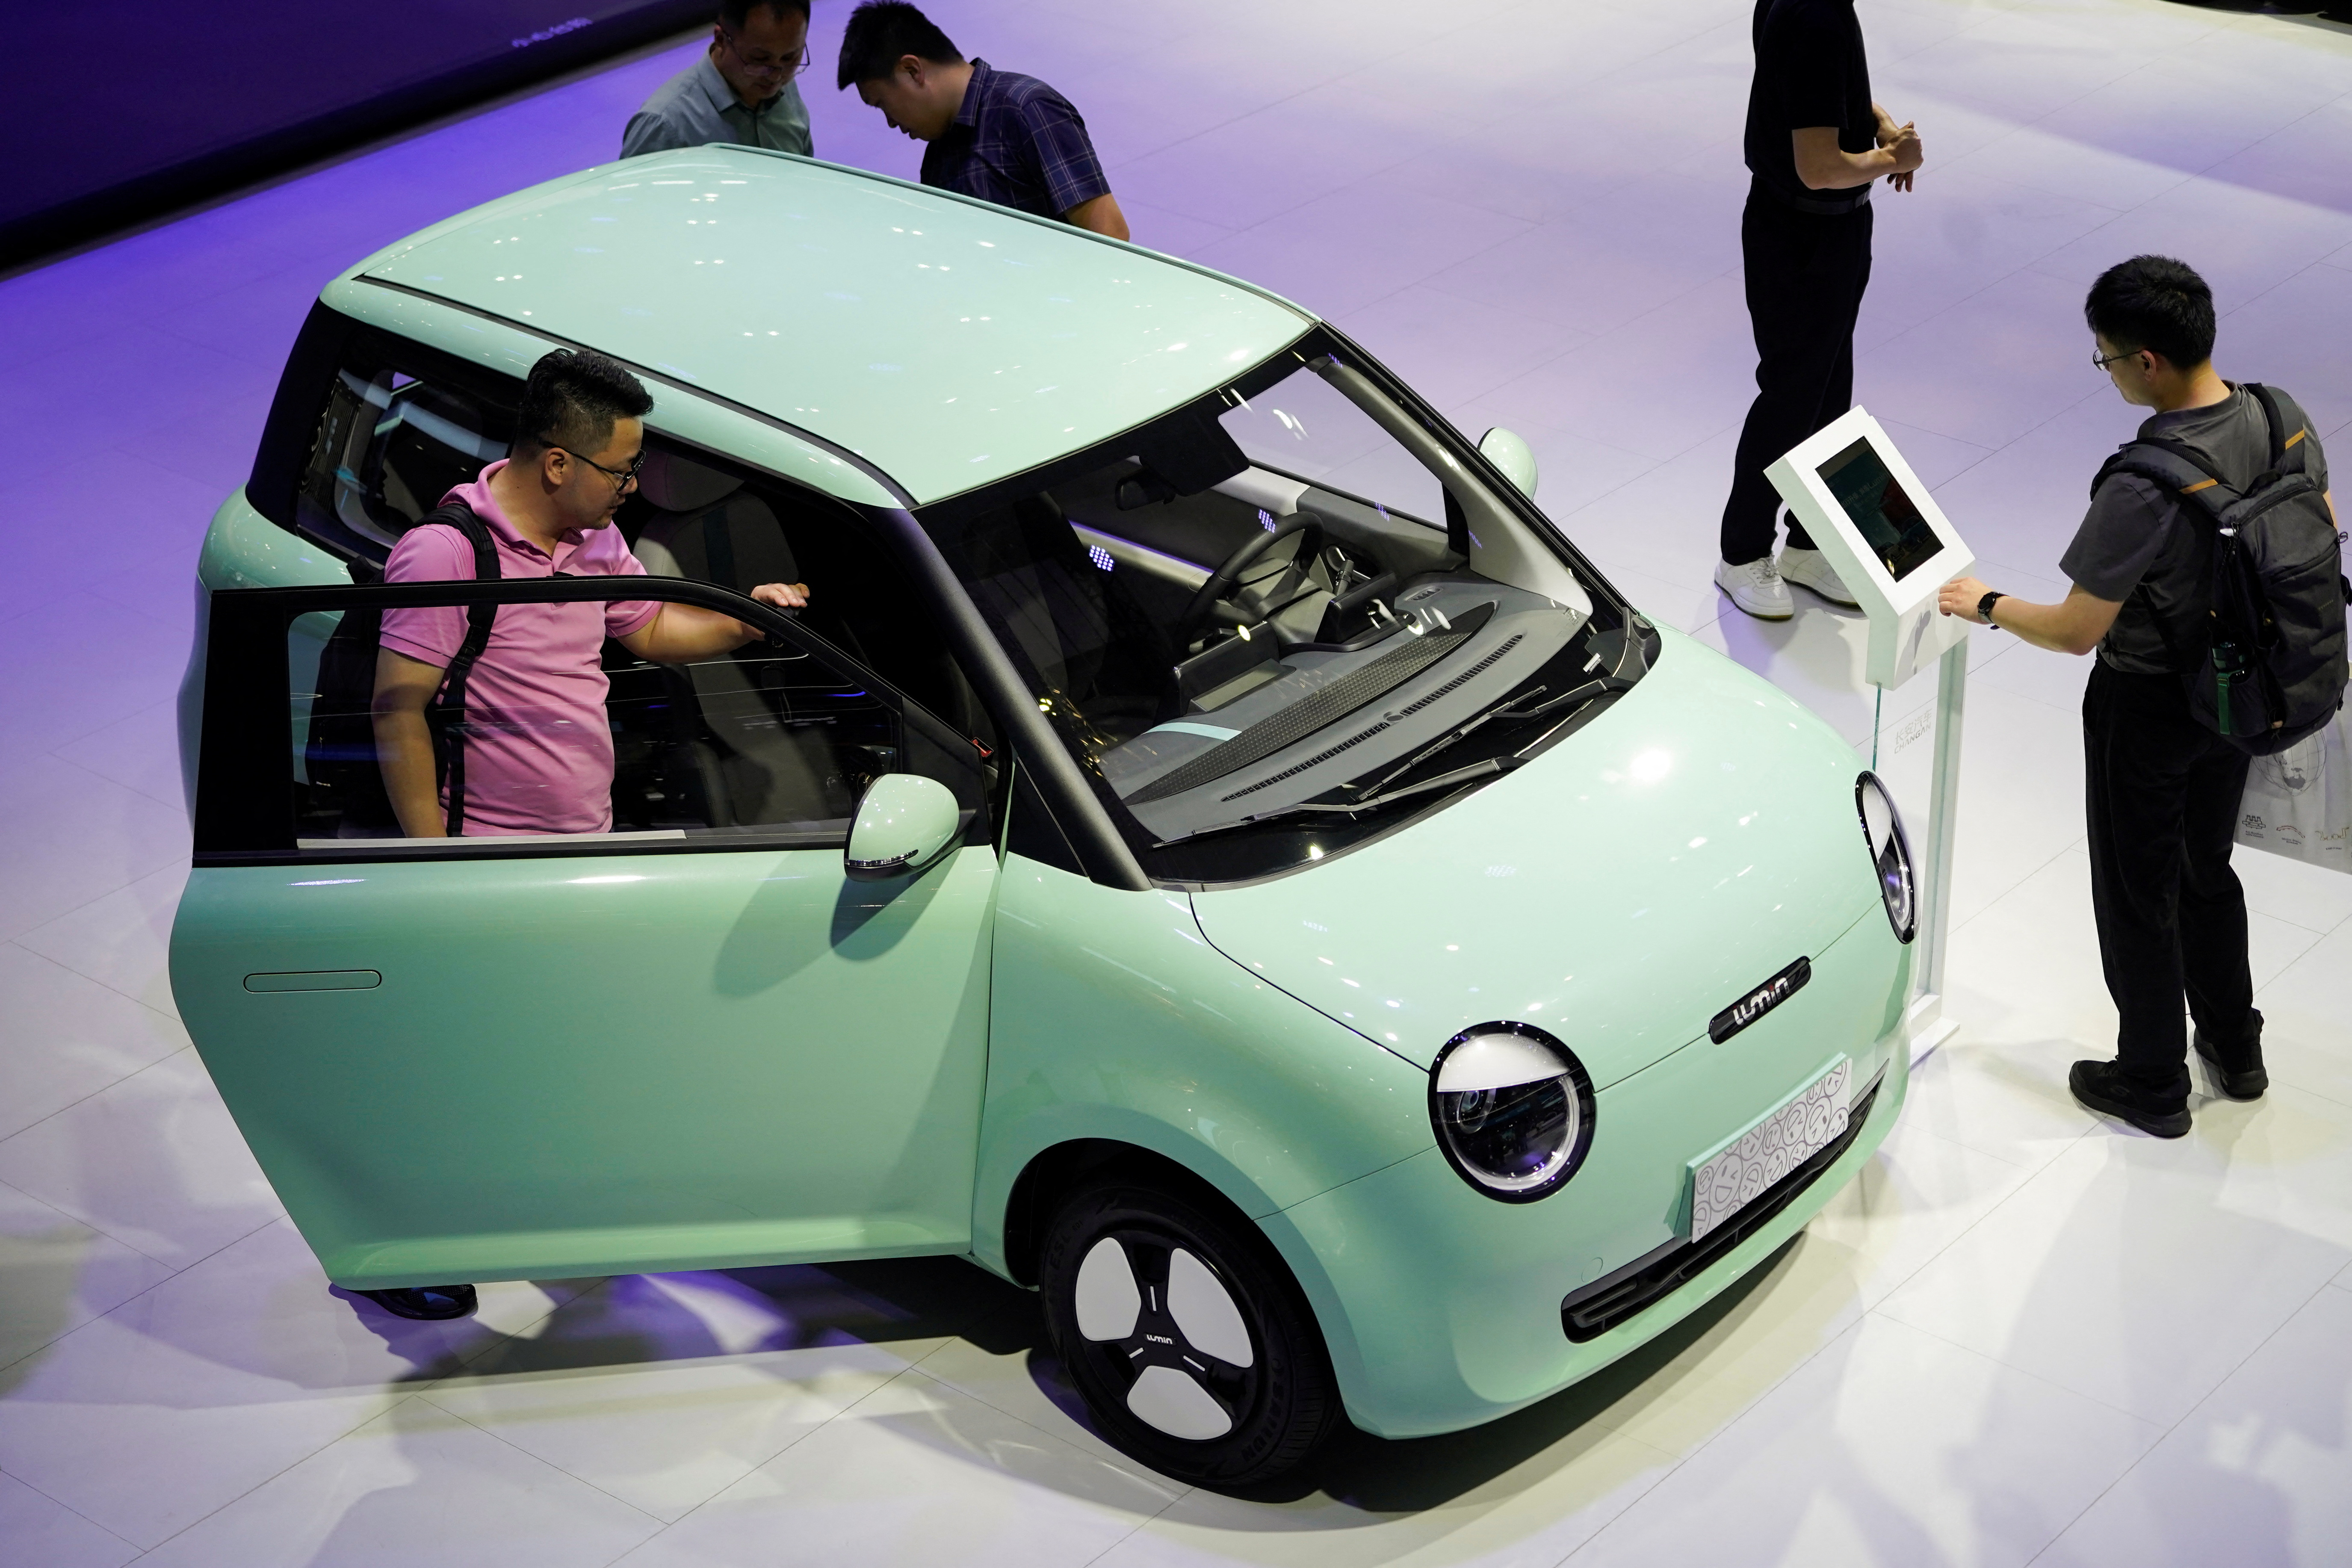 Auto show opens with much fanfare in Xi'an - People's Daily Online